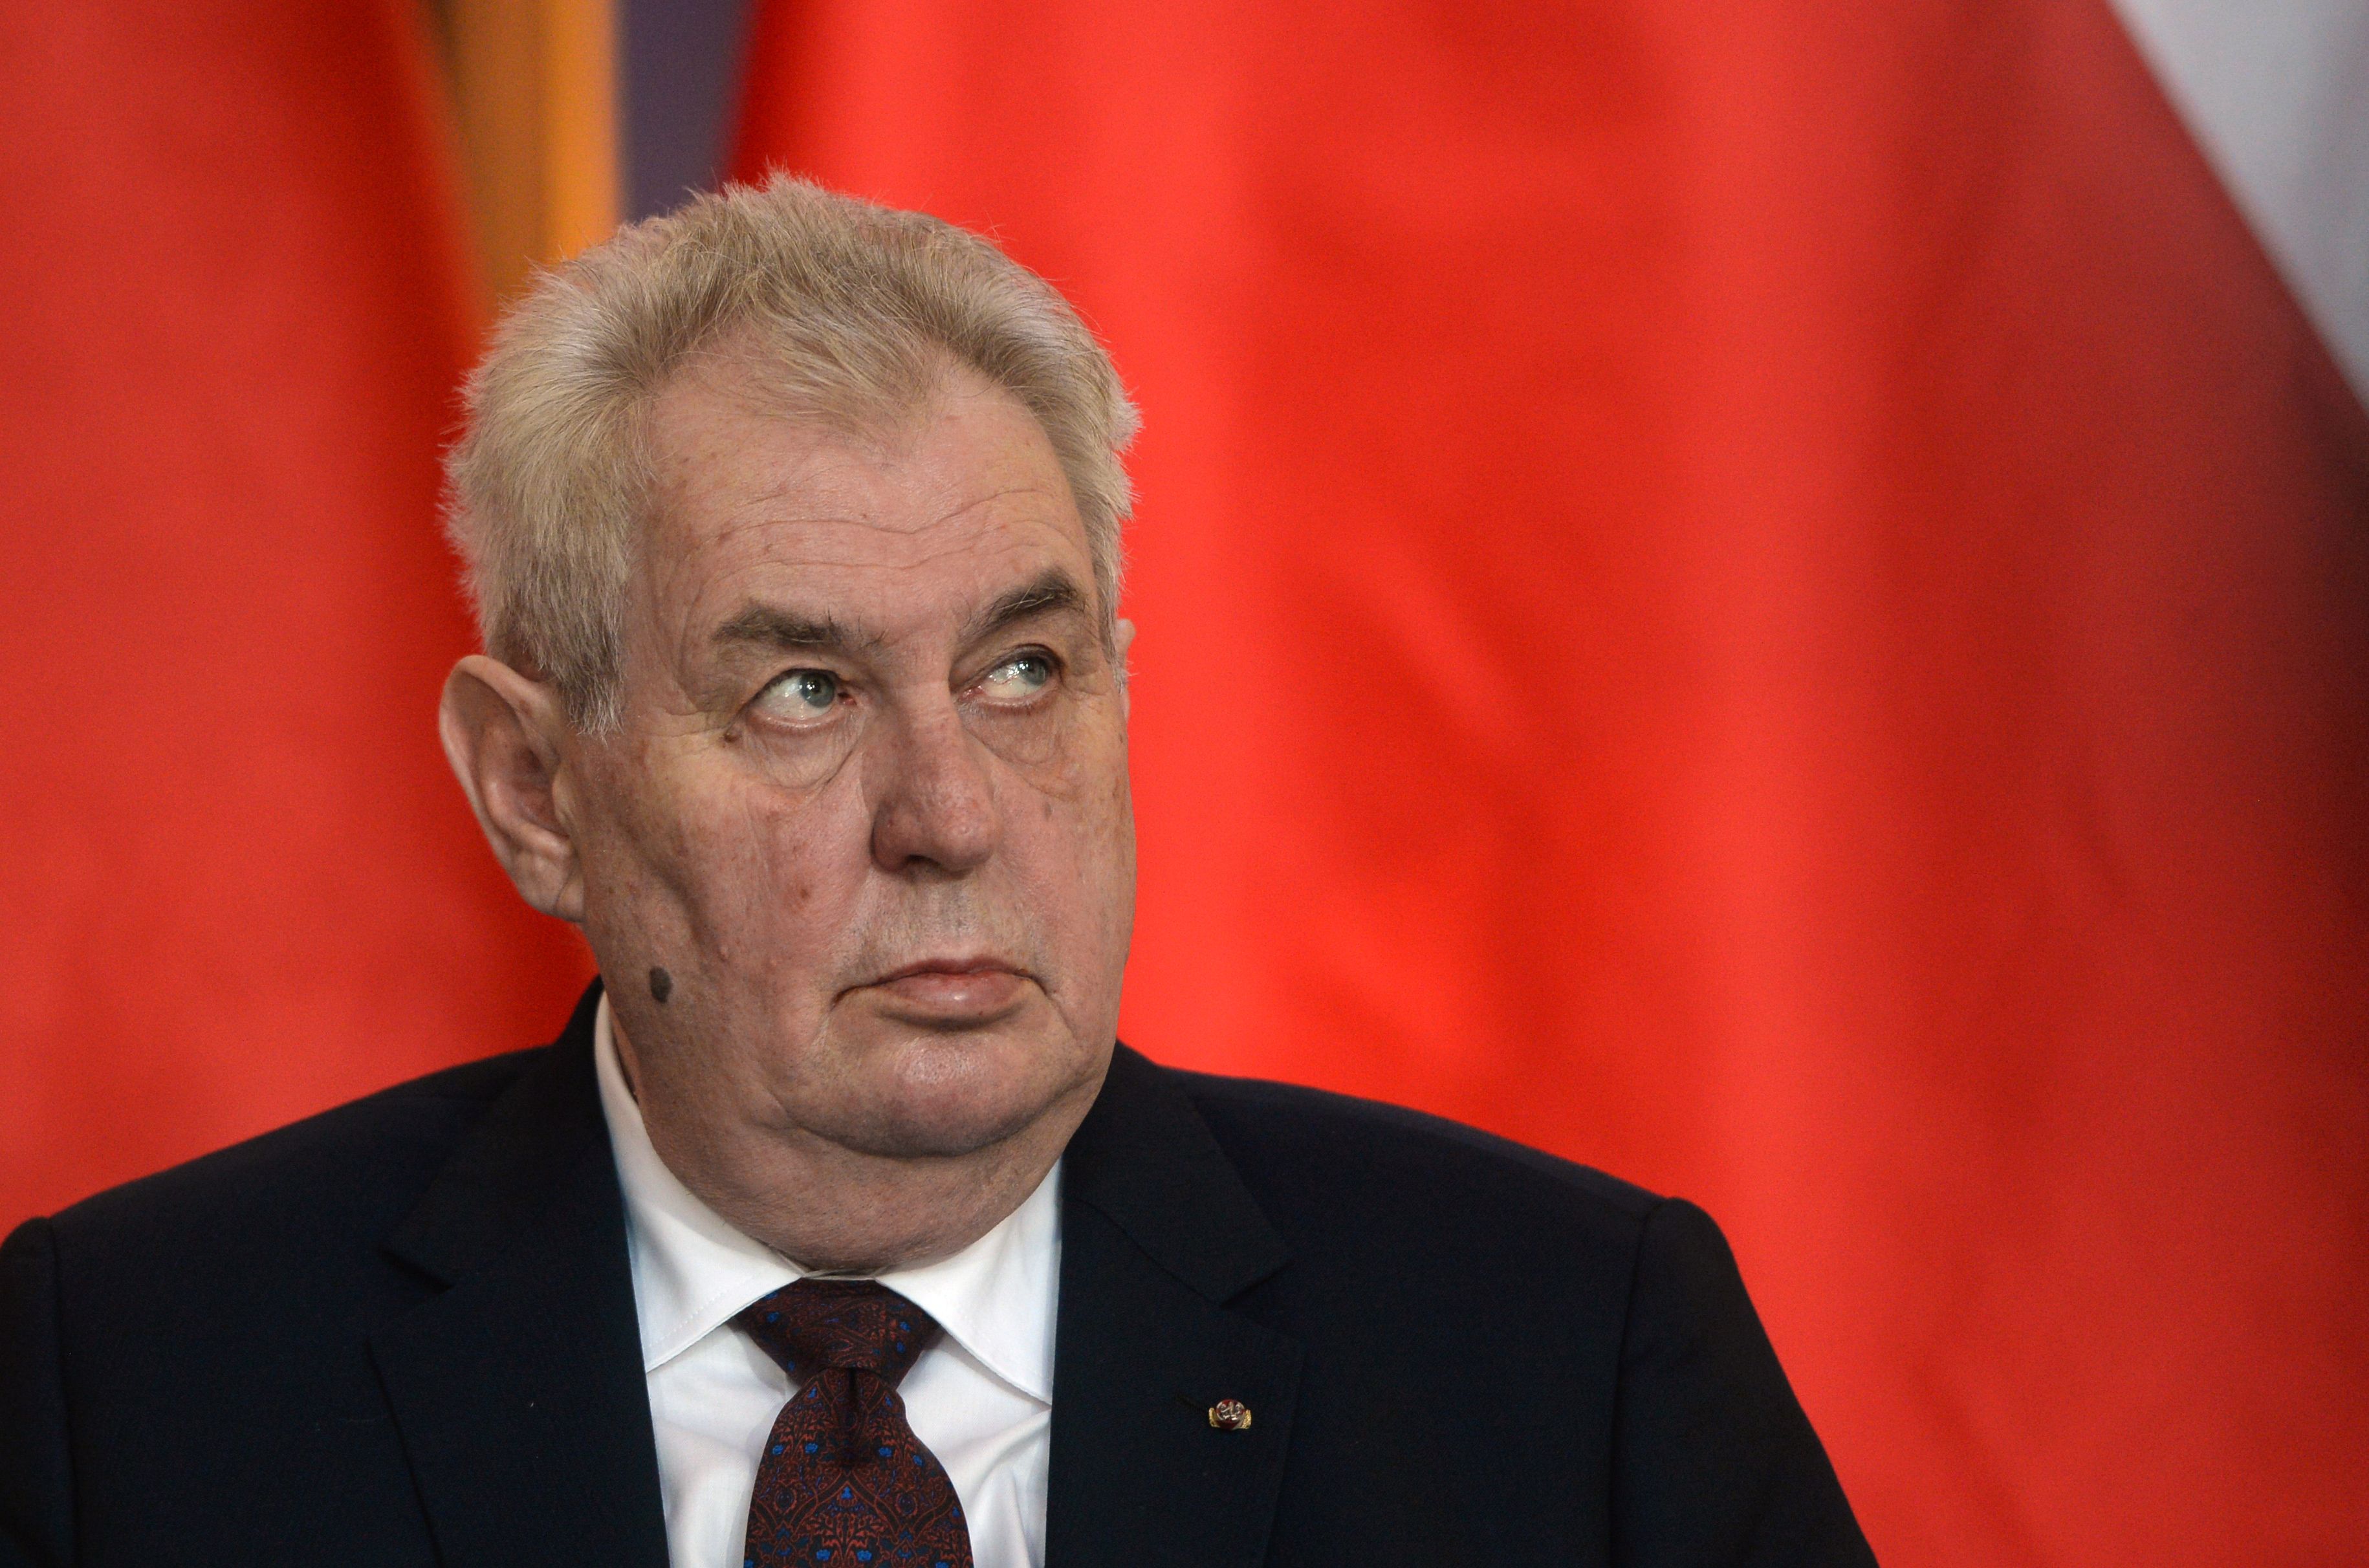 Czech President Milos Zeman listens to the Chinese President on March 29, 2016, in Prague. (Michal Cizek—AFP/Getty Images)